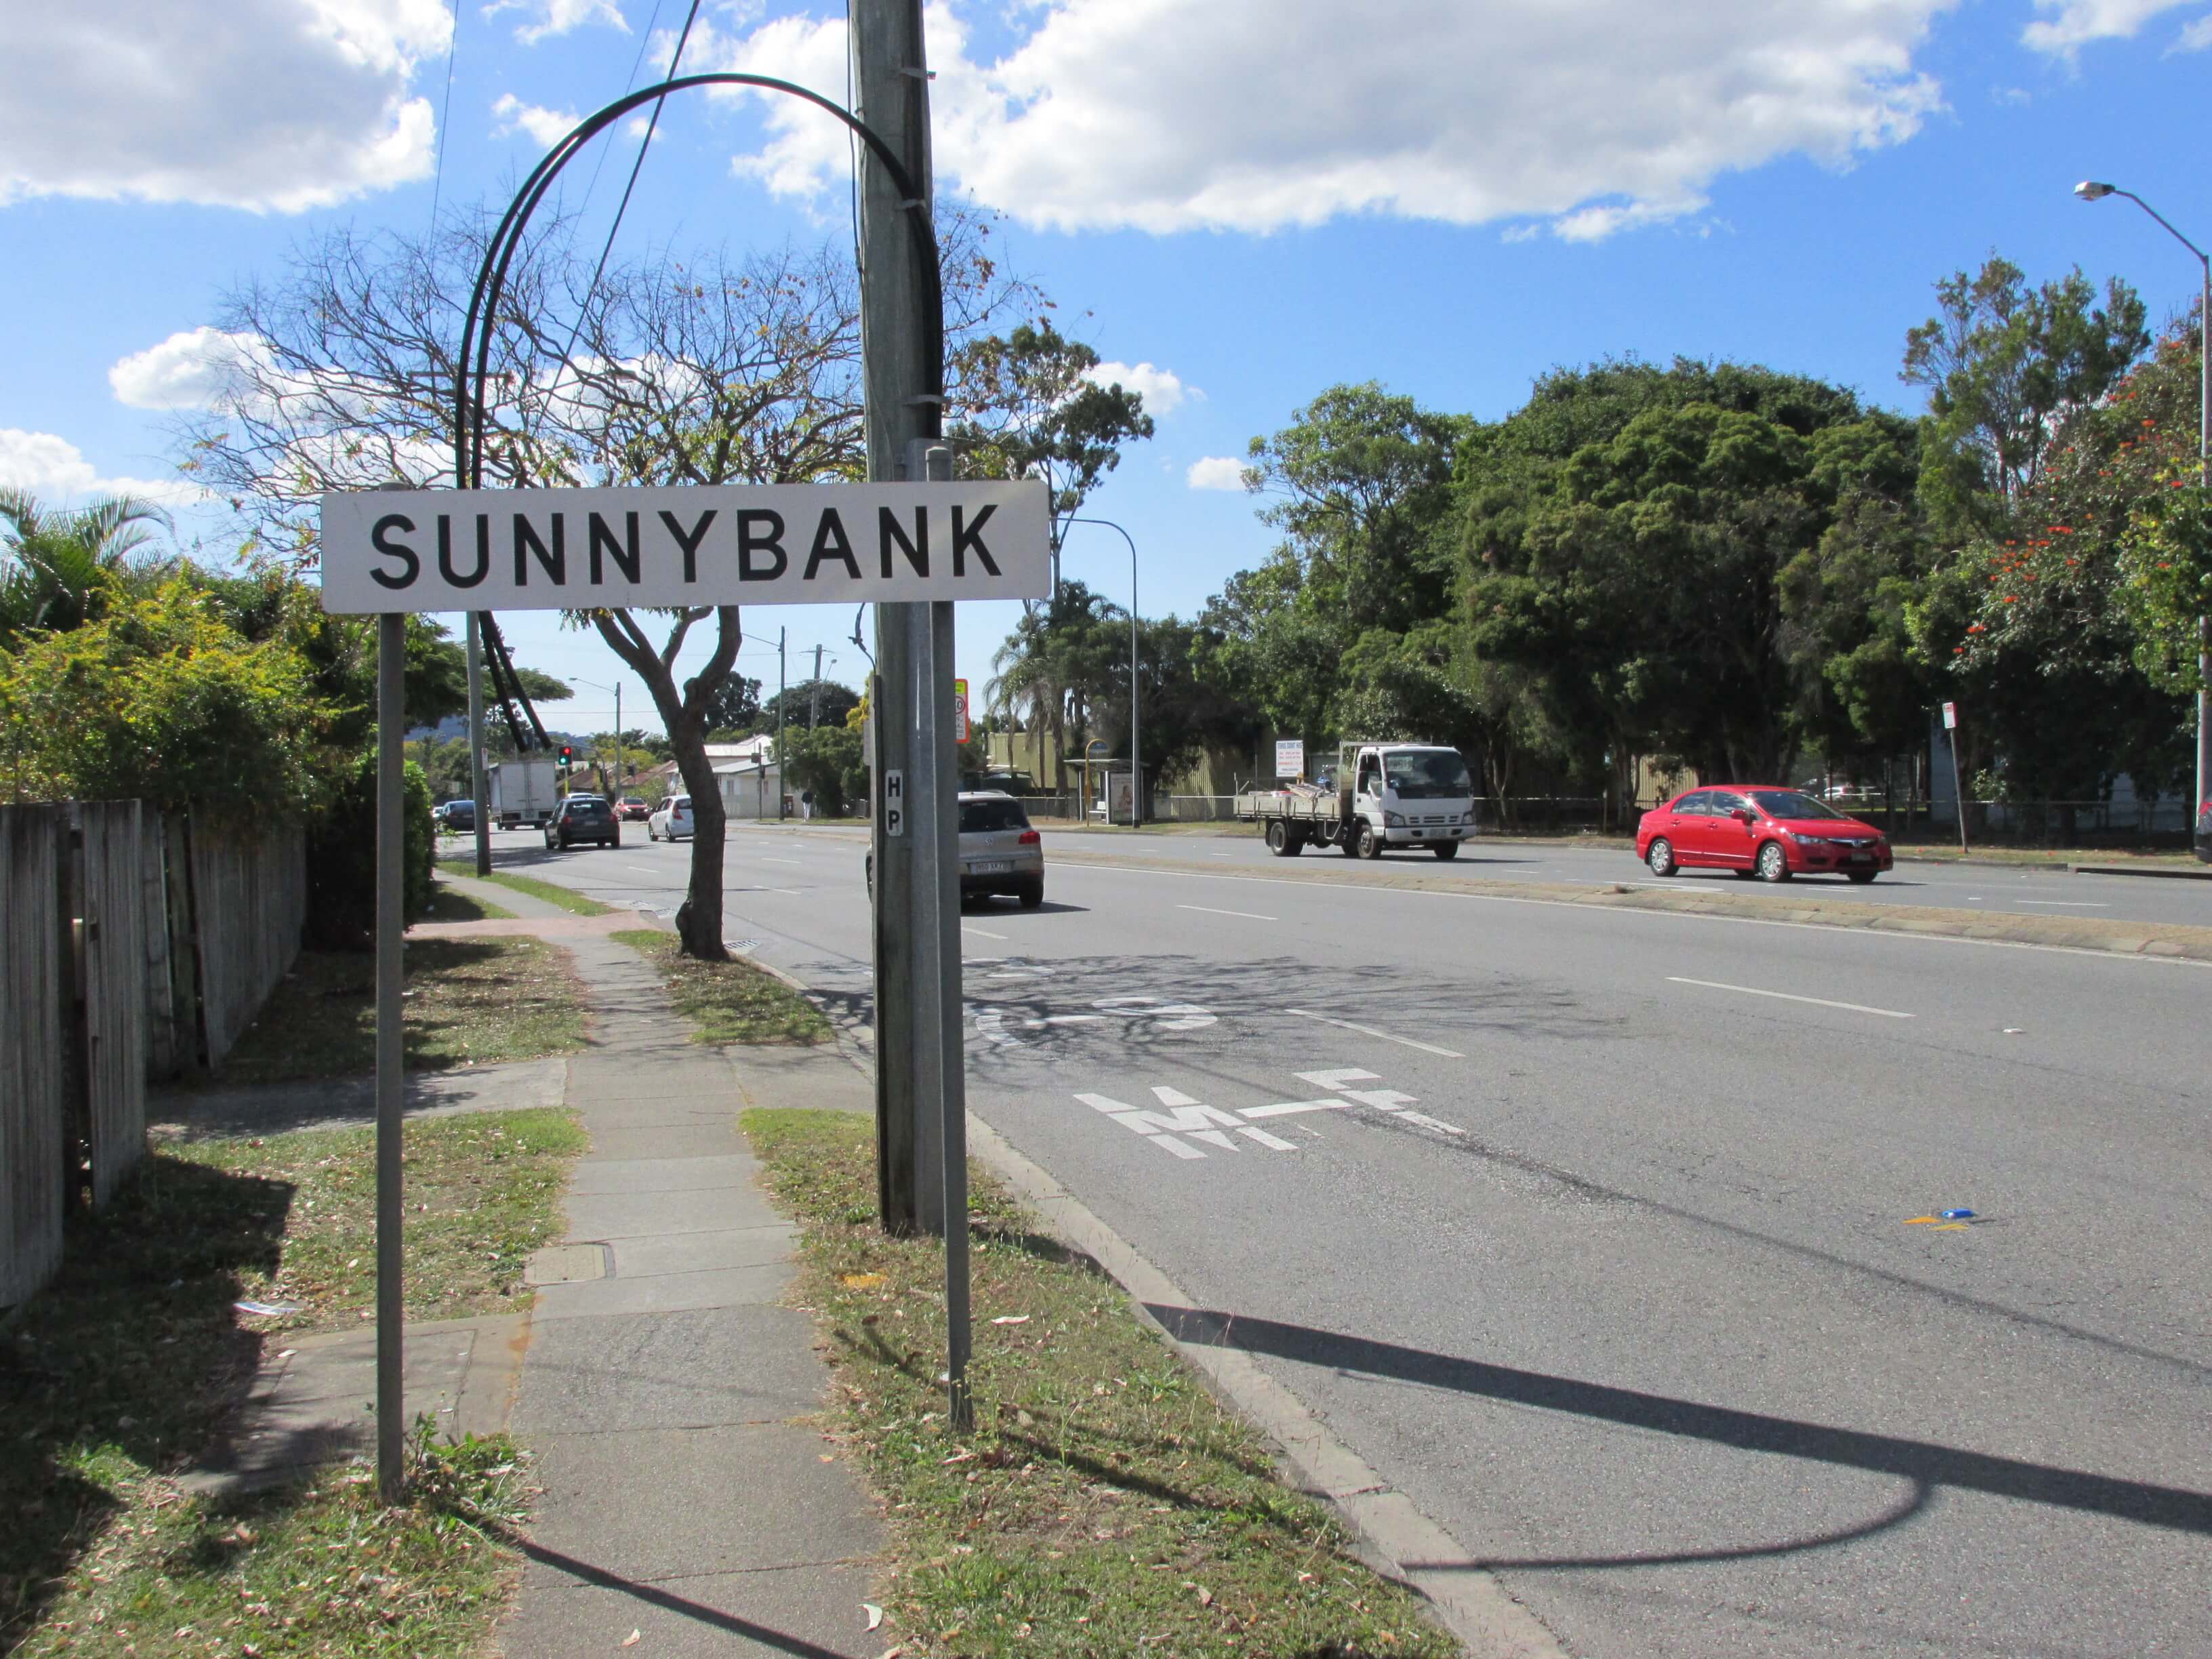 About Sunnybank, Qld